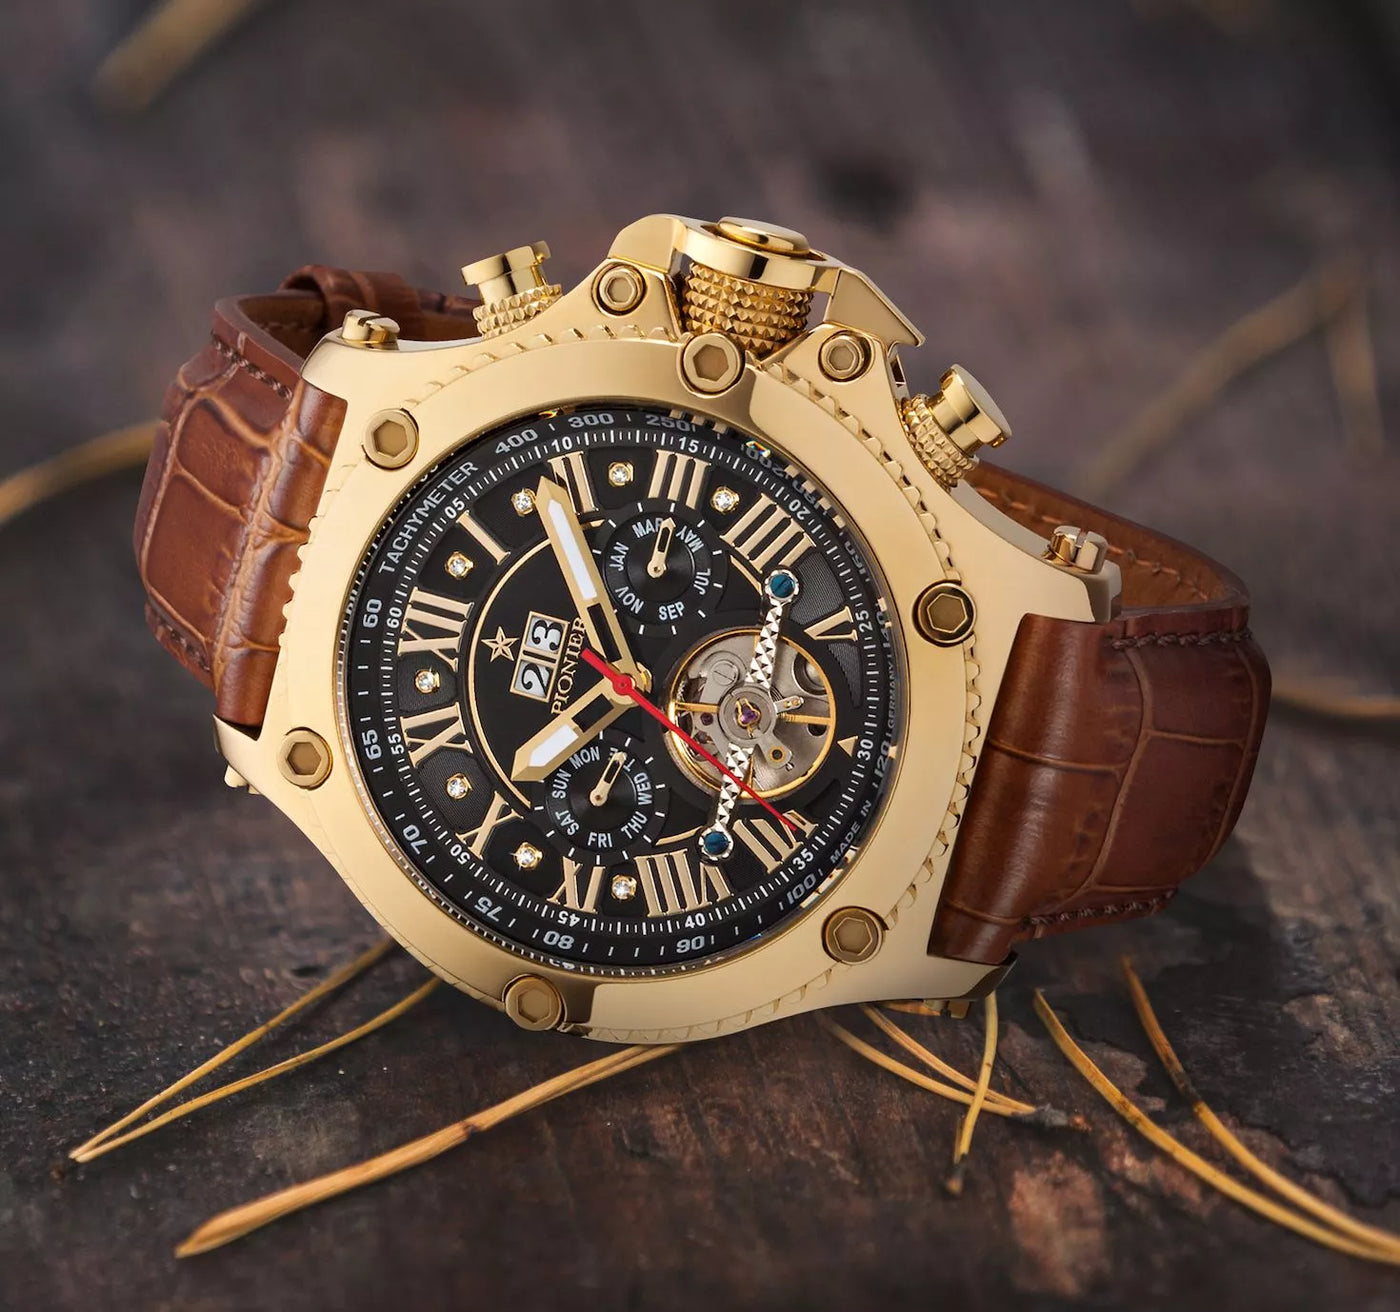 The marvelous finish and the sturdy sophisticated look will make for an unforgettable timepiece.